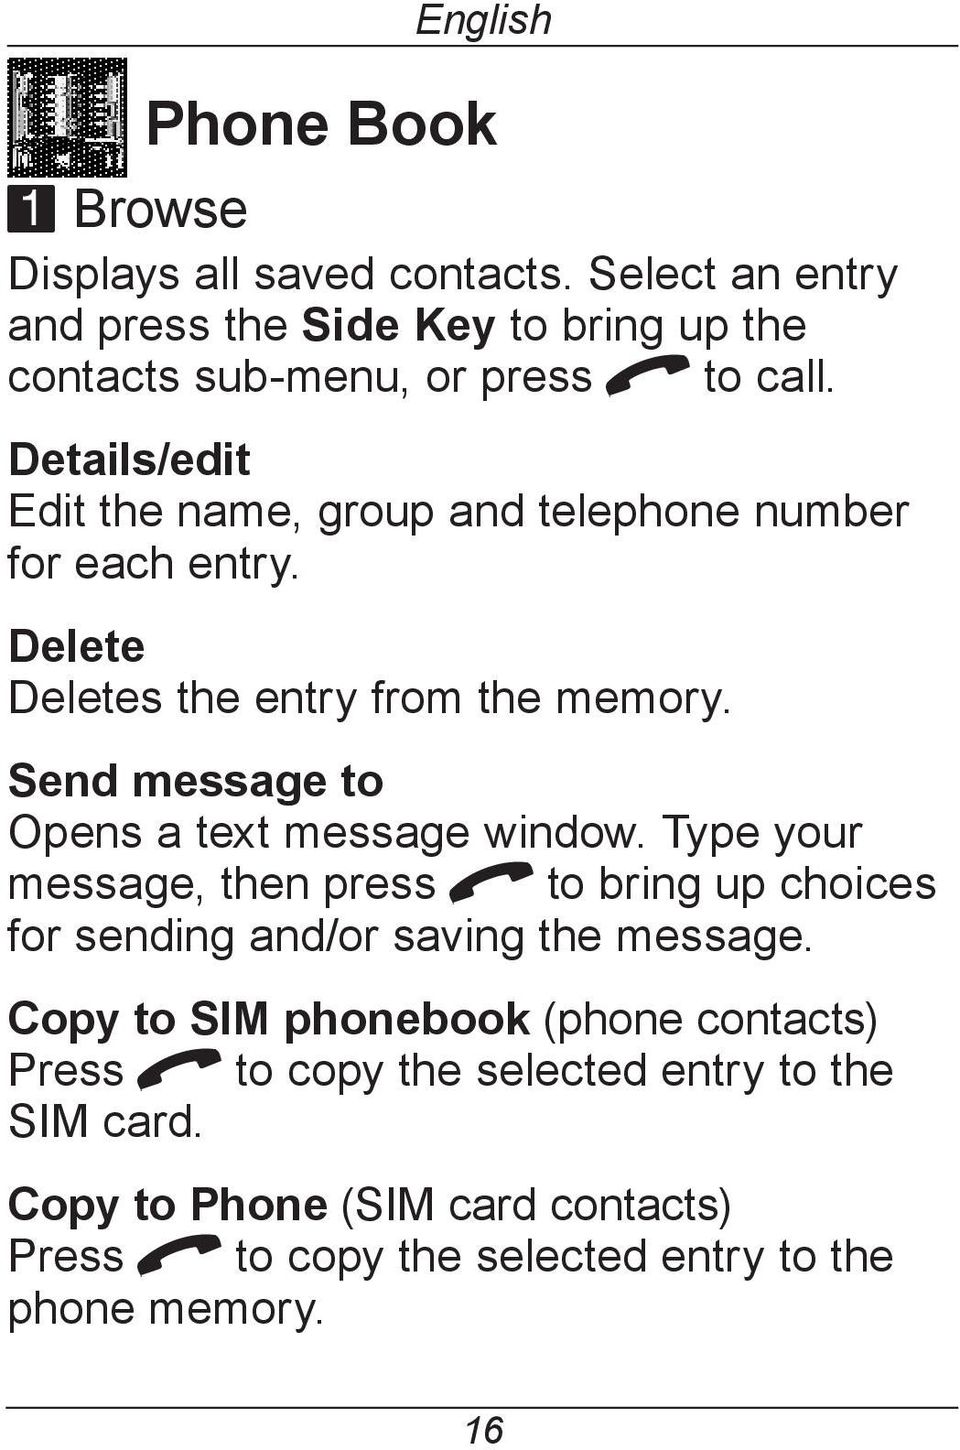 Details/edit Edit the name, group and telephone number for each entry. Delete Deletes the entry from the memory.